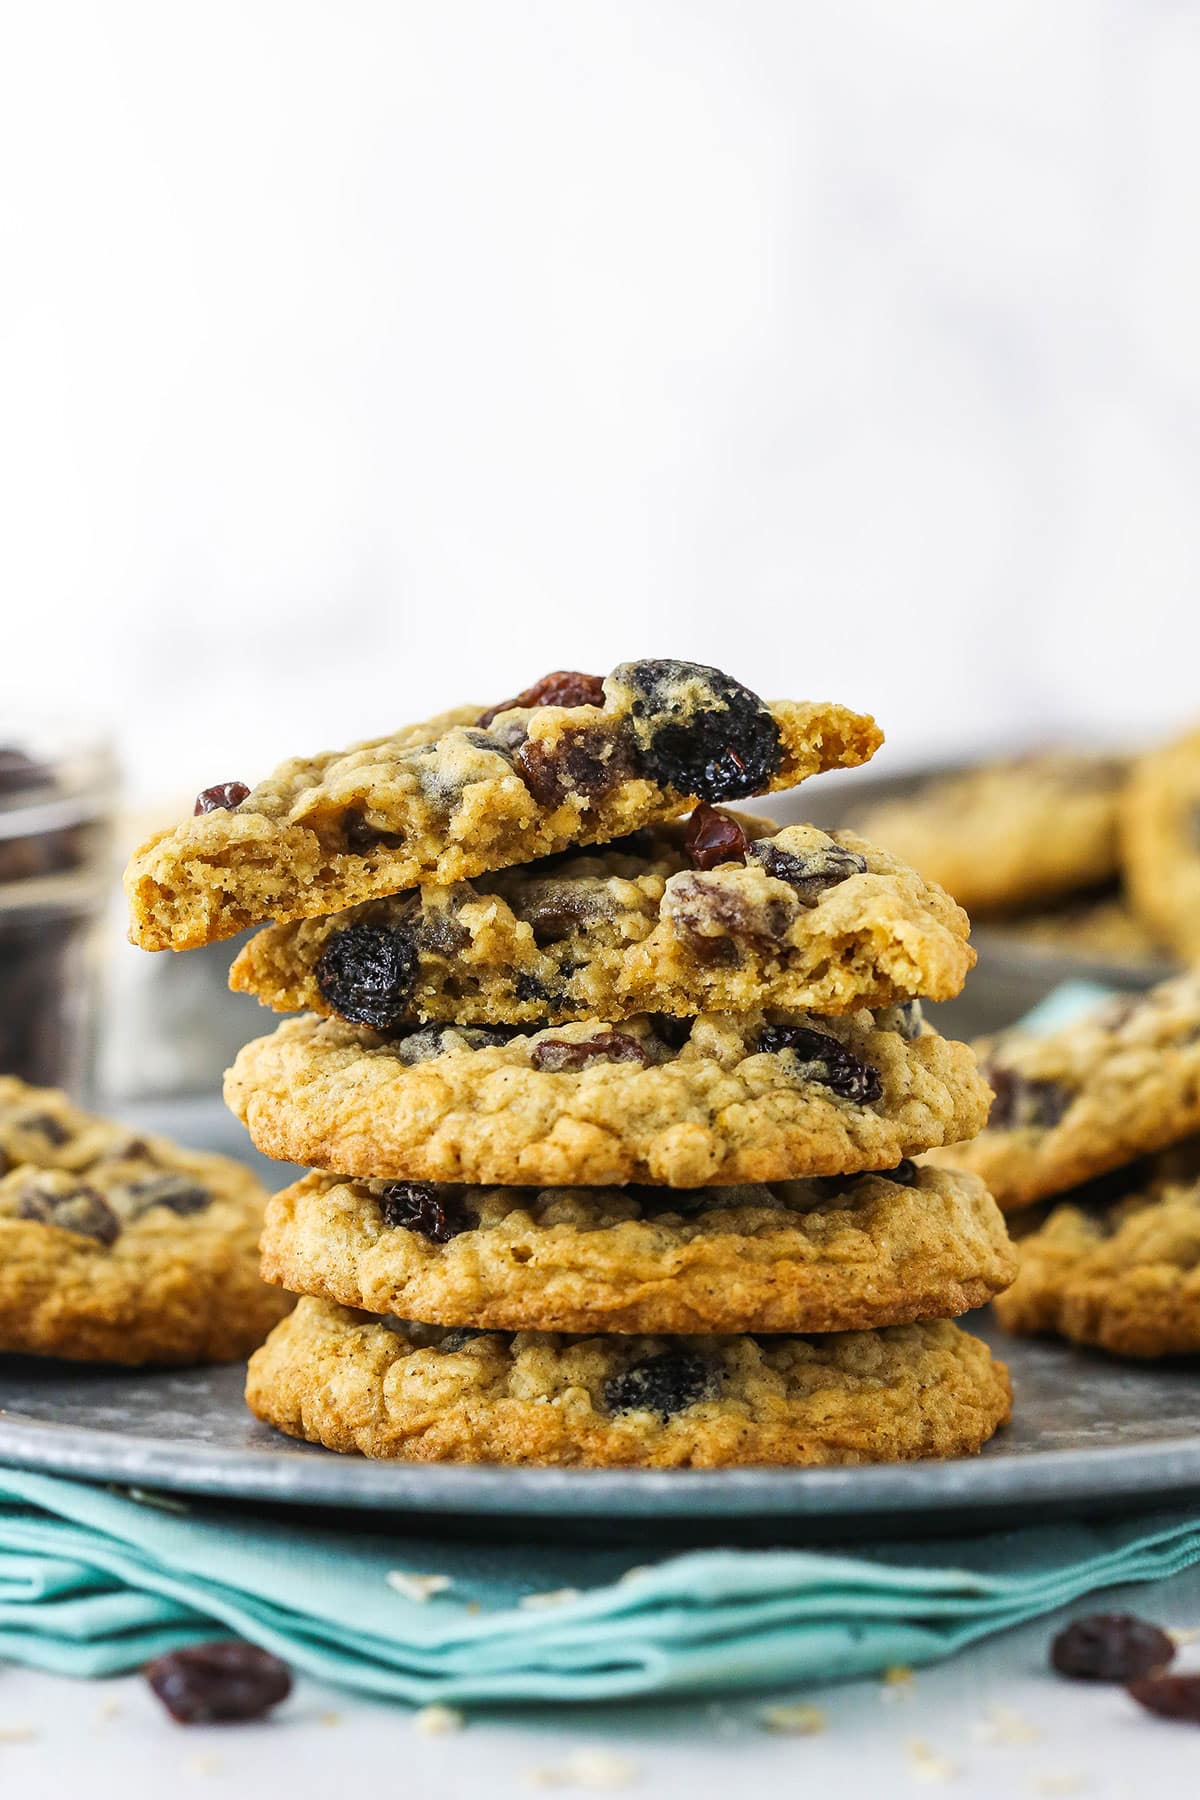 Side view showing a stack of oatmeal raisin cookies on a plate